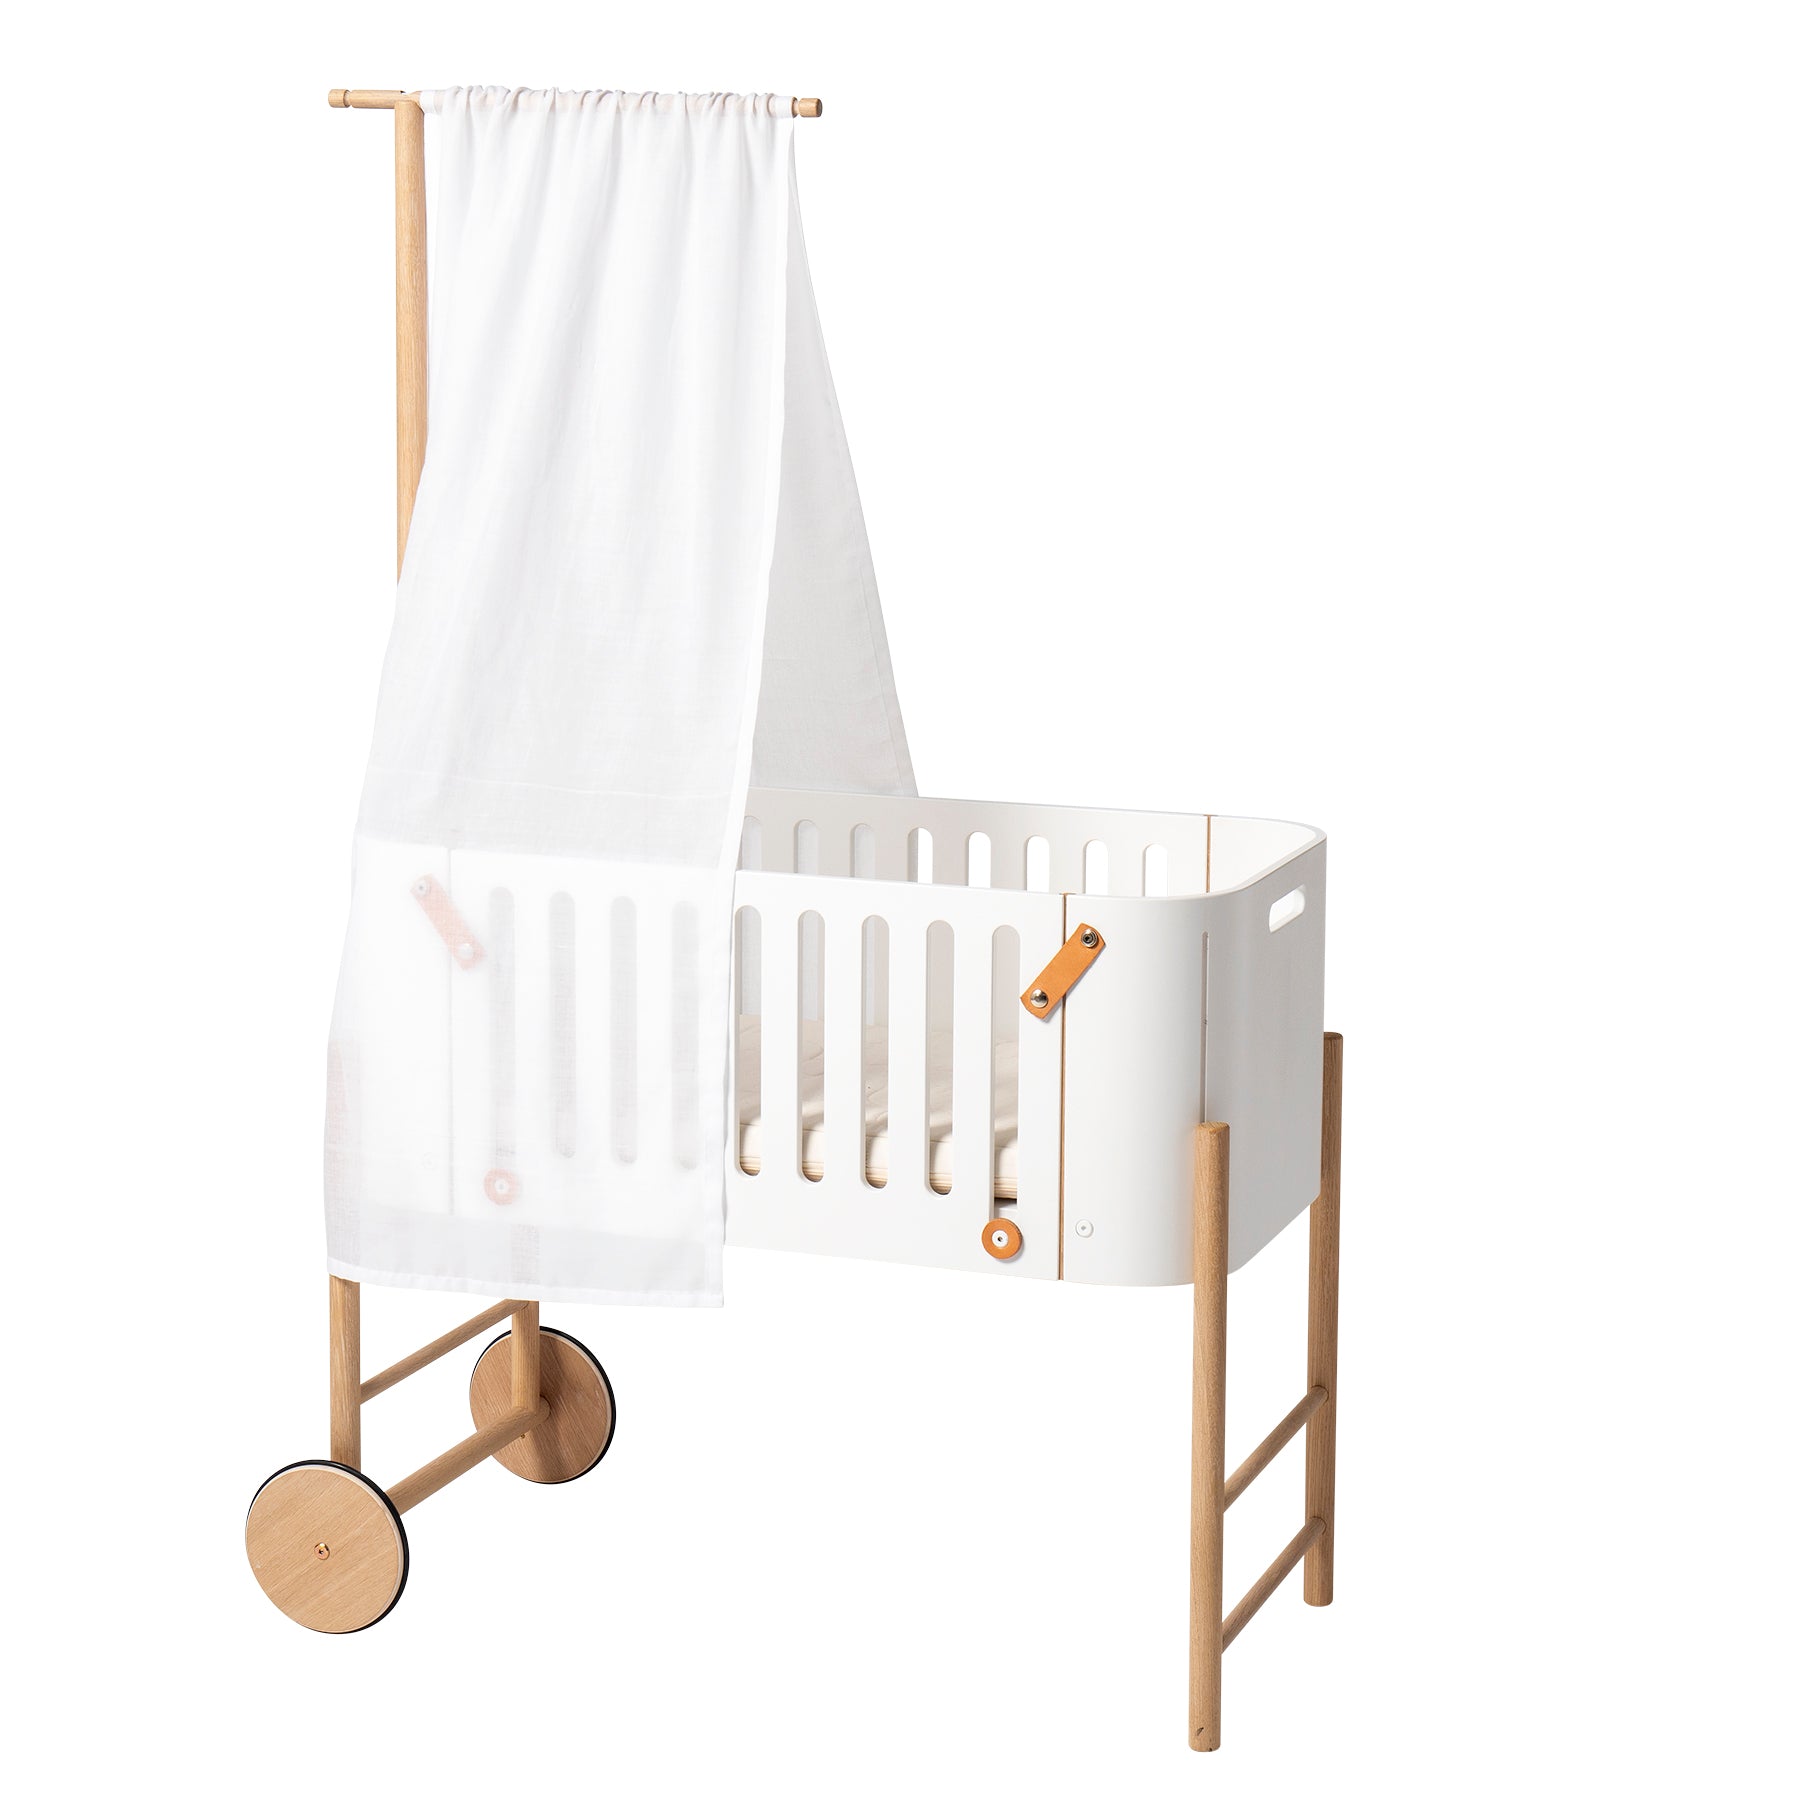 oliver-furniture-wood-co-sleeper-incl-bench-conversion-42x82-cm-white-oak-with-holder-canopy-mattress- (3)